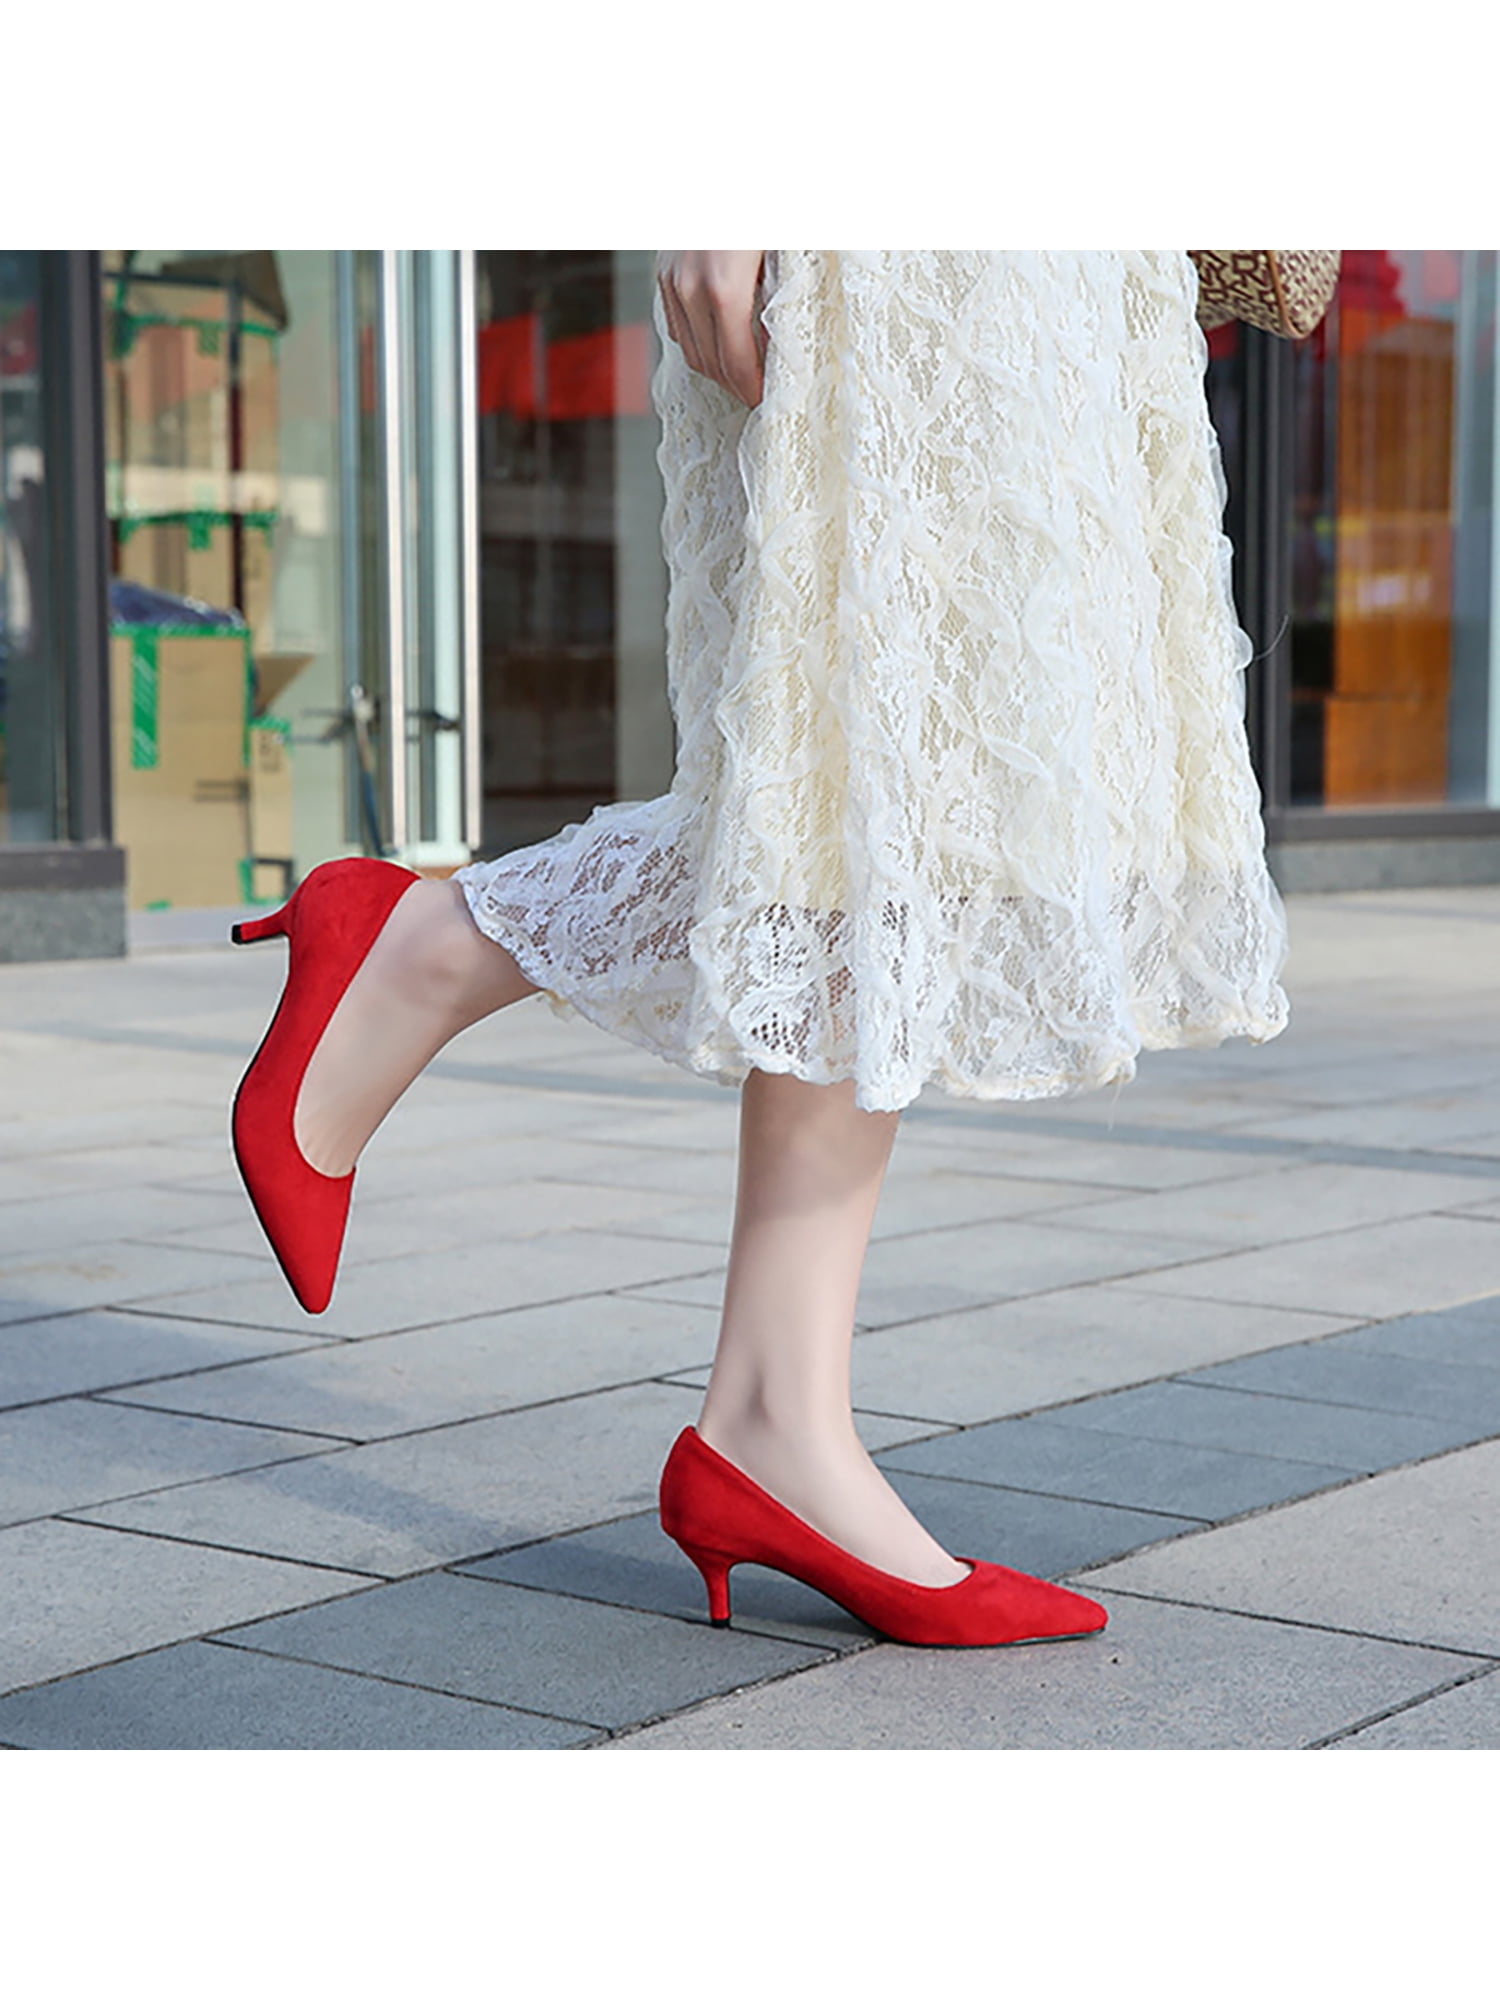 womens red dress shoes